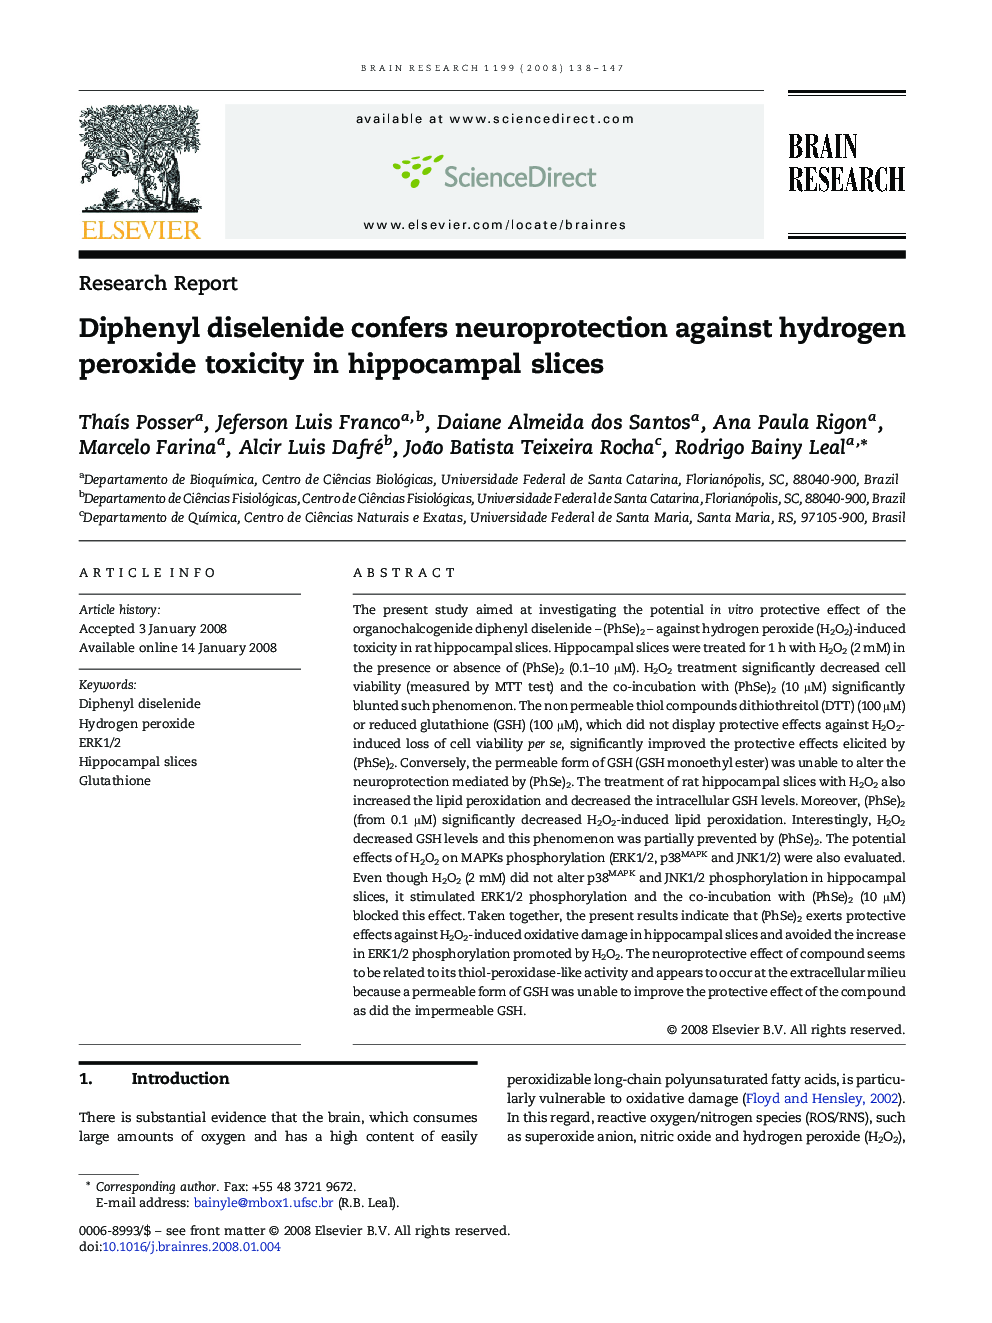 Diphenyl diselenide confers neuroprotection against hydrogen peroxide toxicity in hippocampal slices